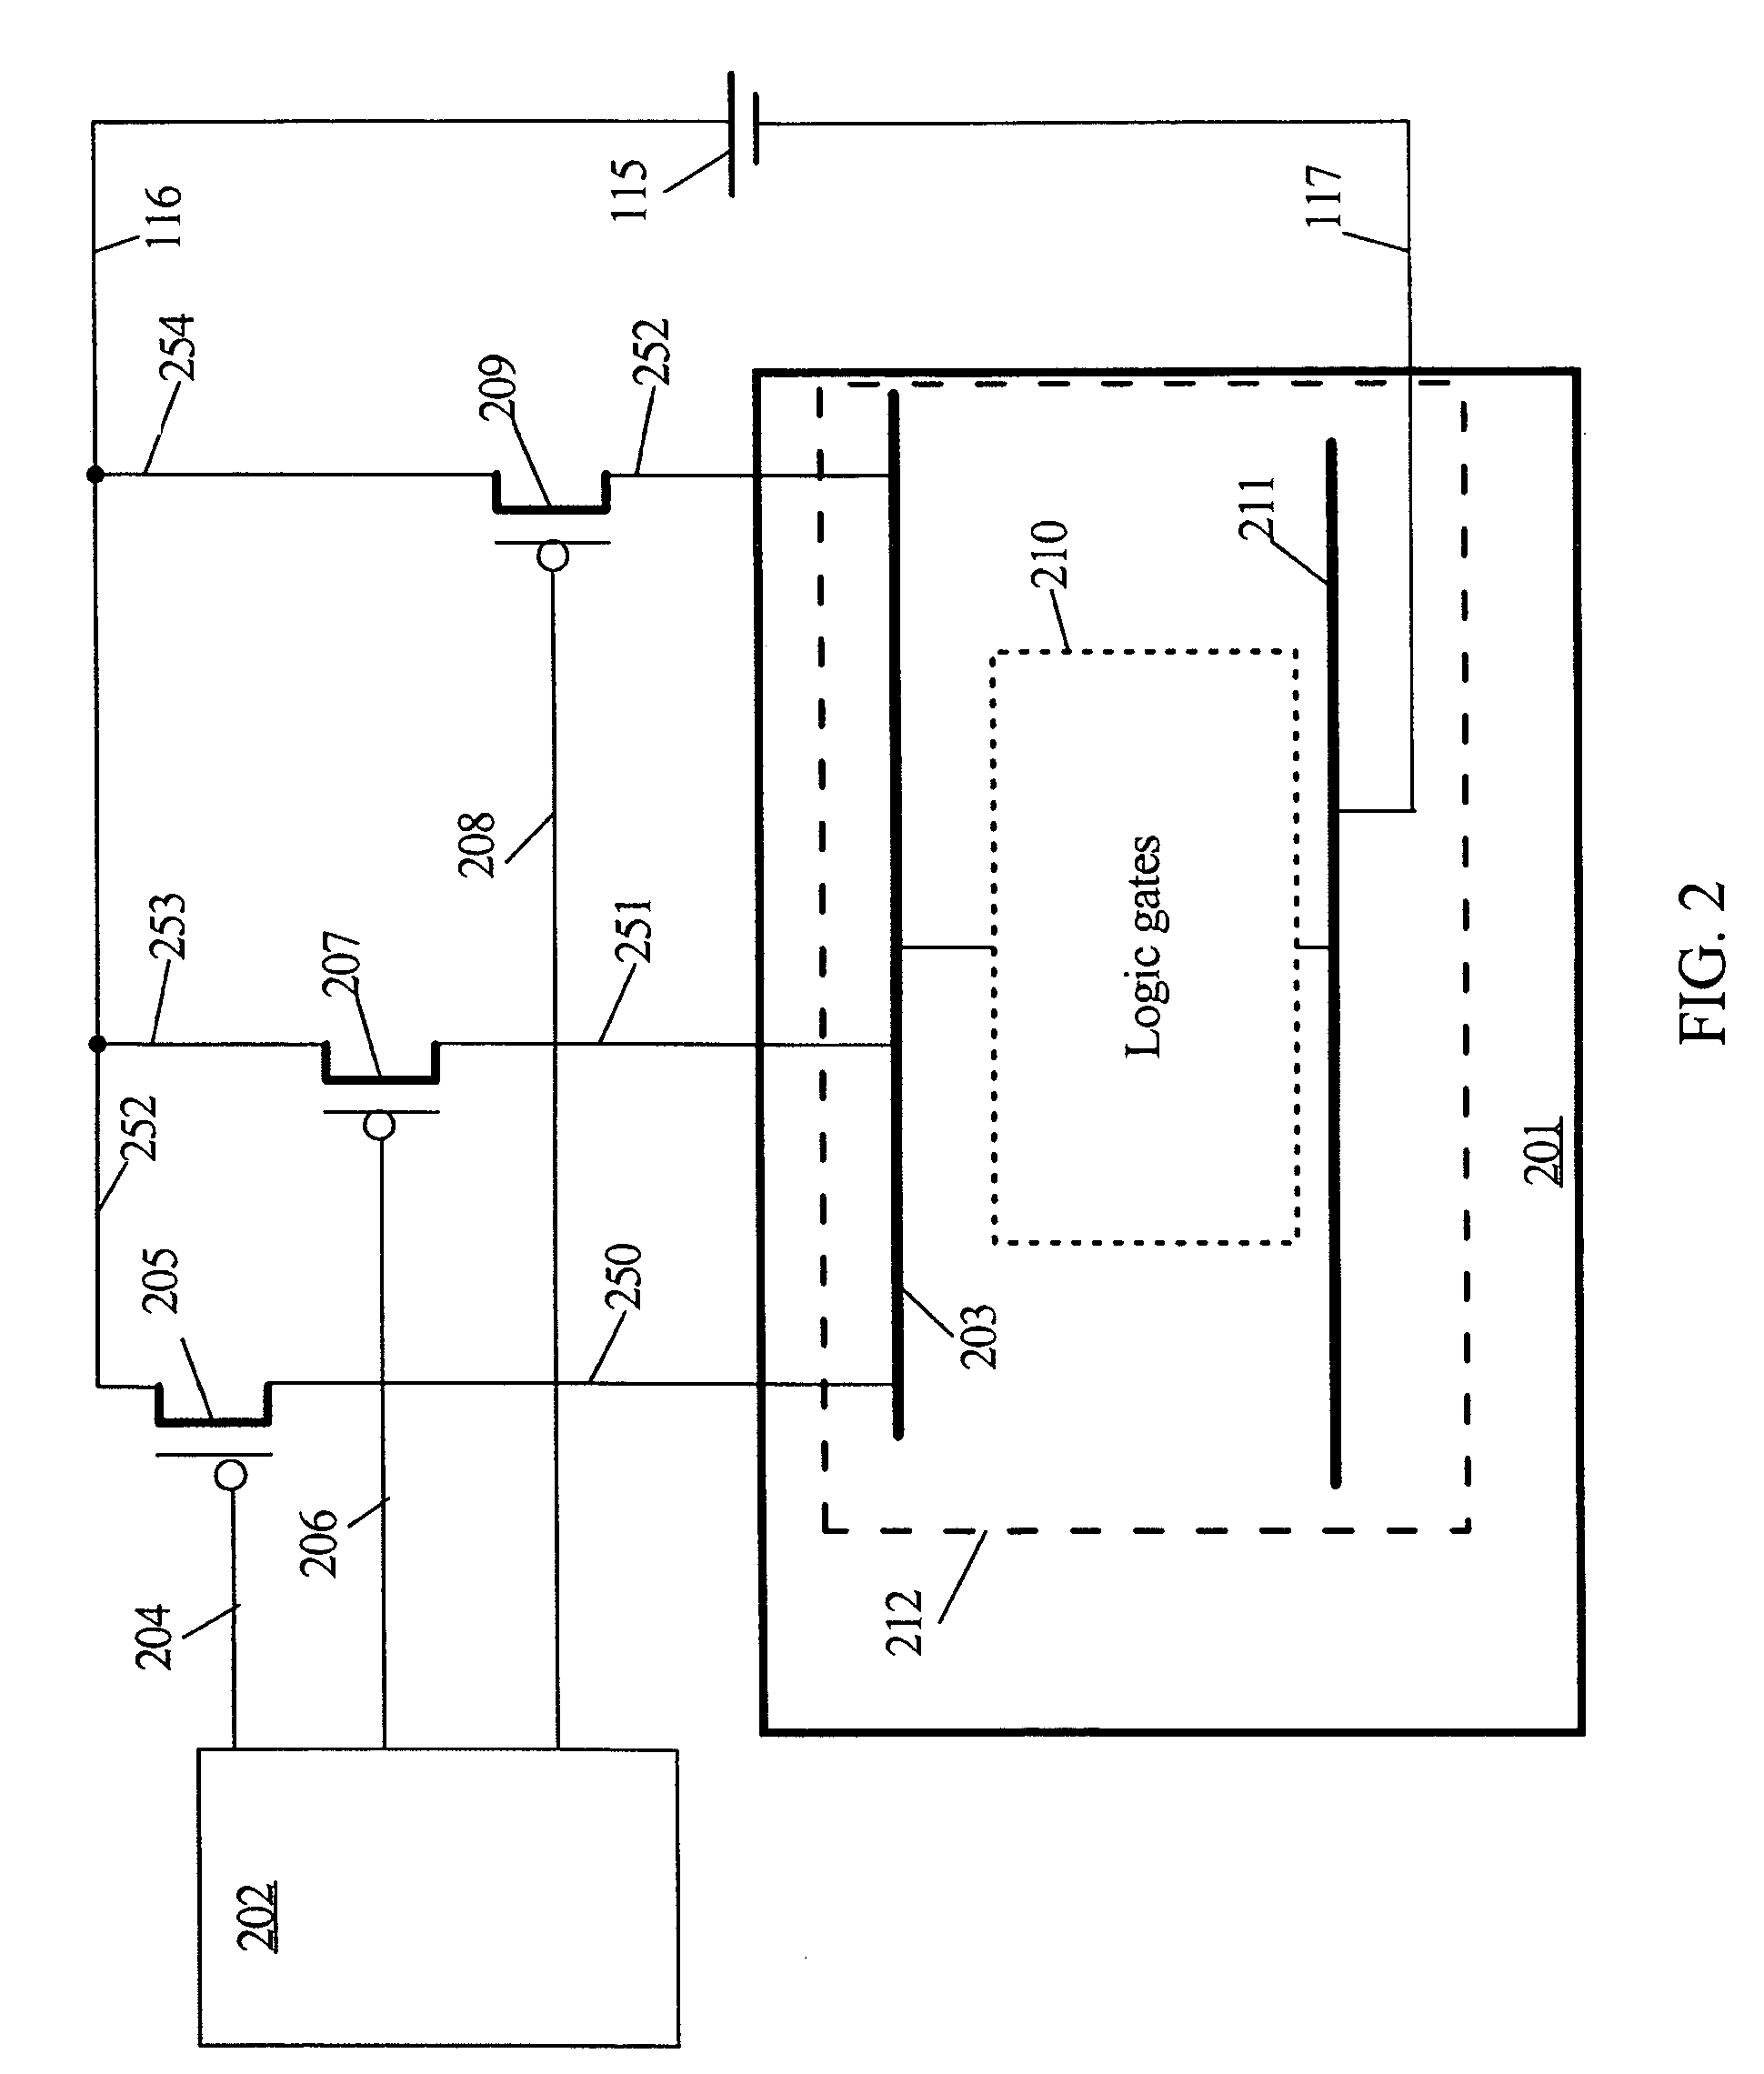 Control circuitry for power gating virtual power supply rails at differing voltage potentials